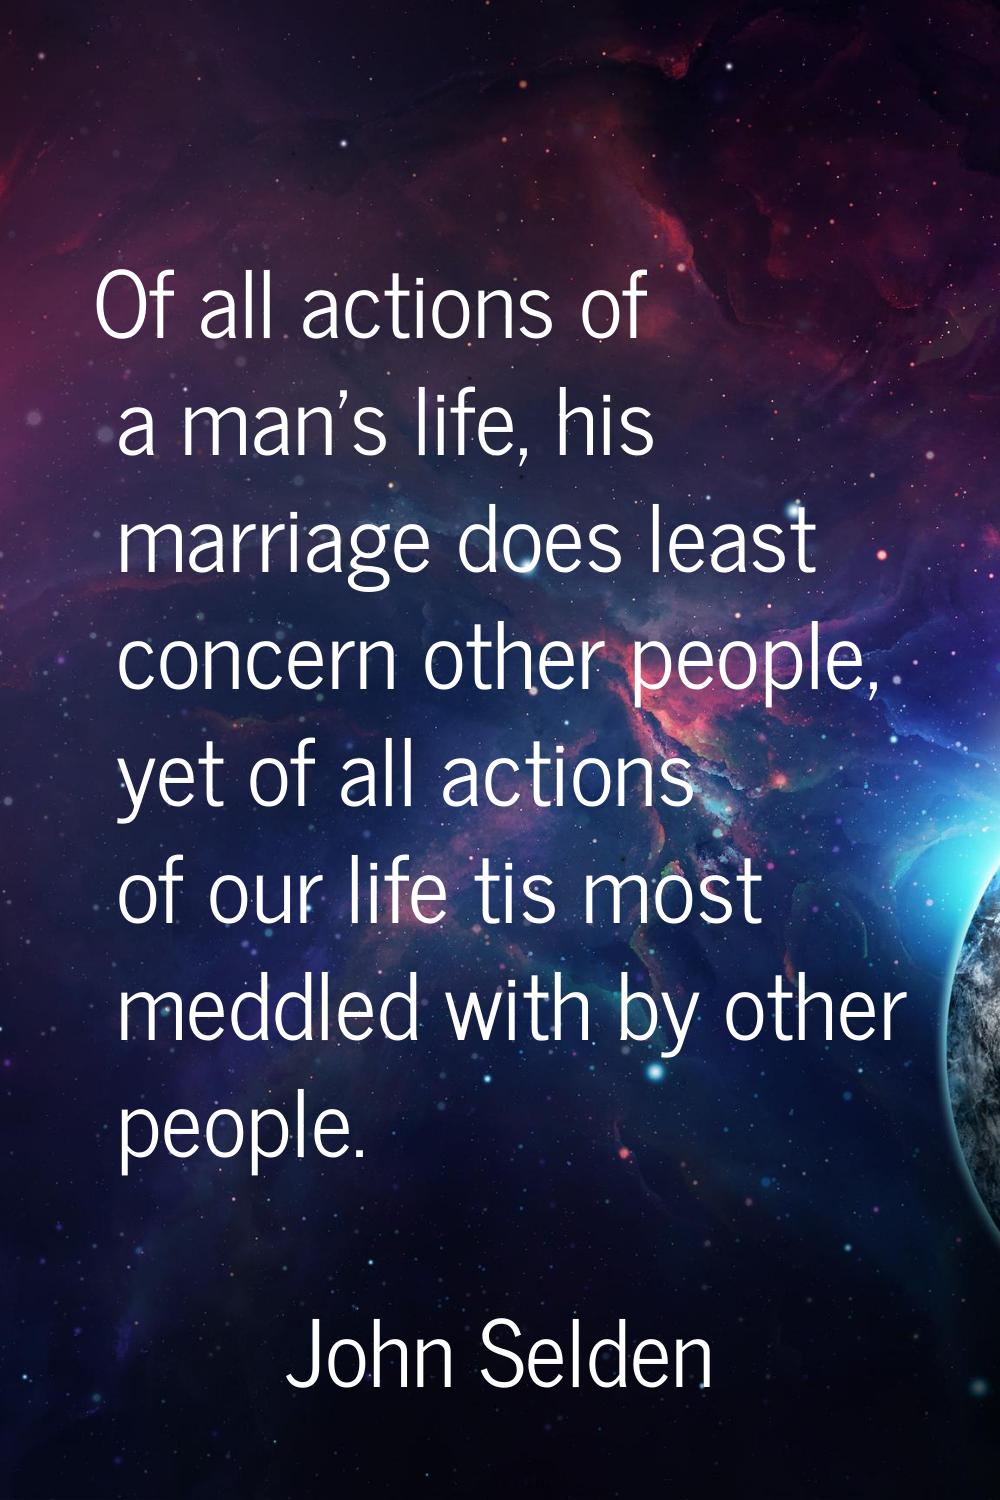 Of all actions of a man's life, his marriage does least concern other people, yet of all actions of